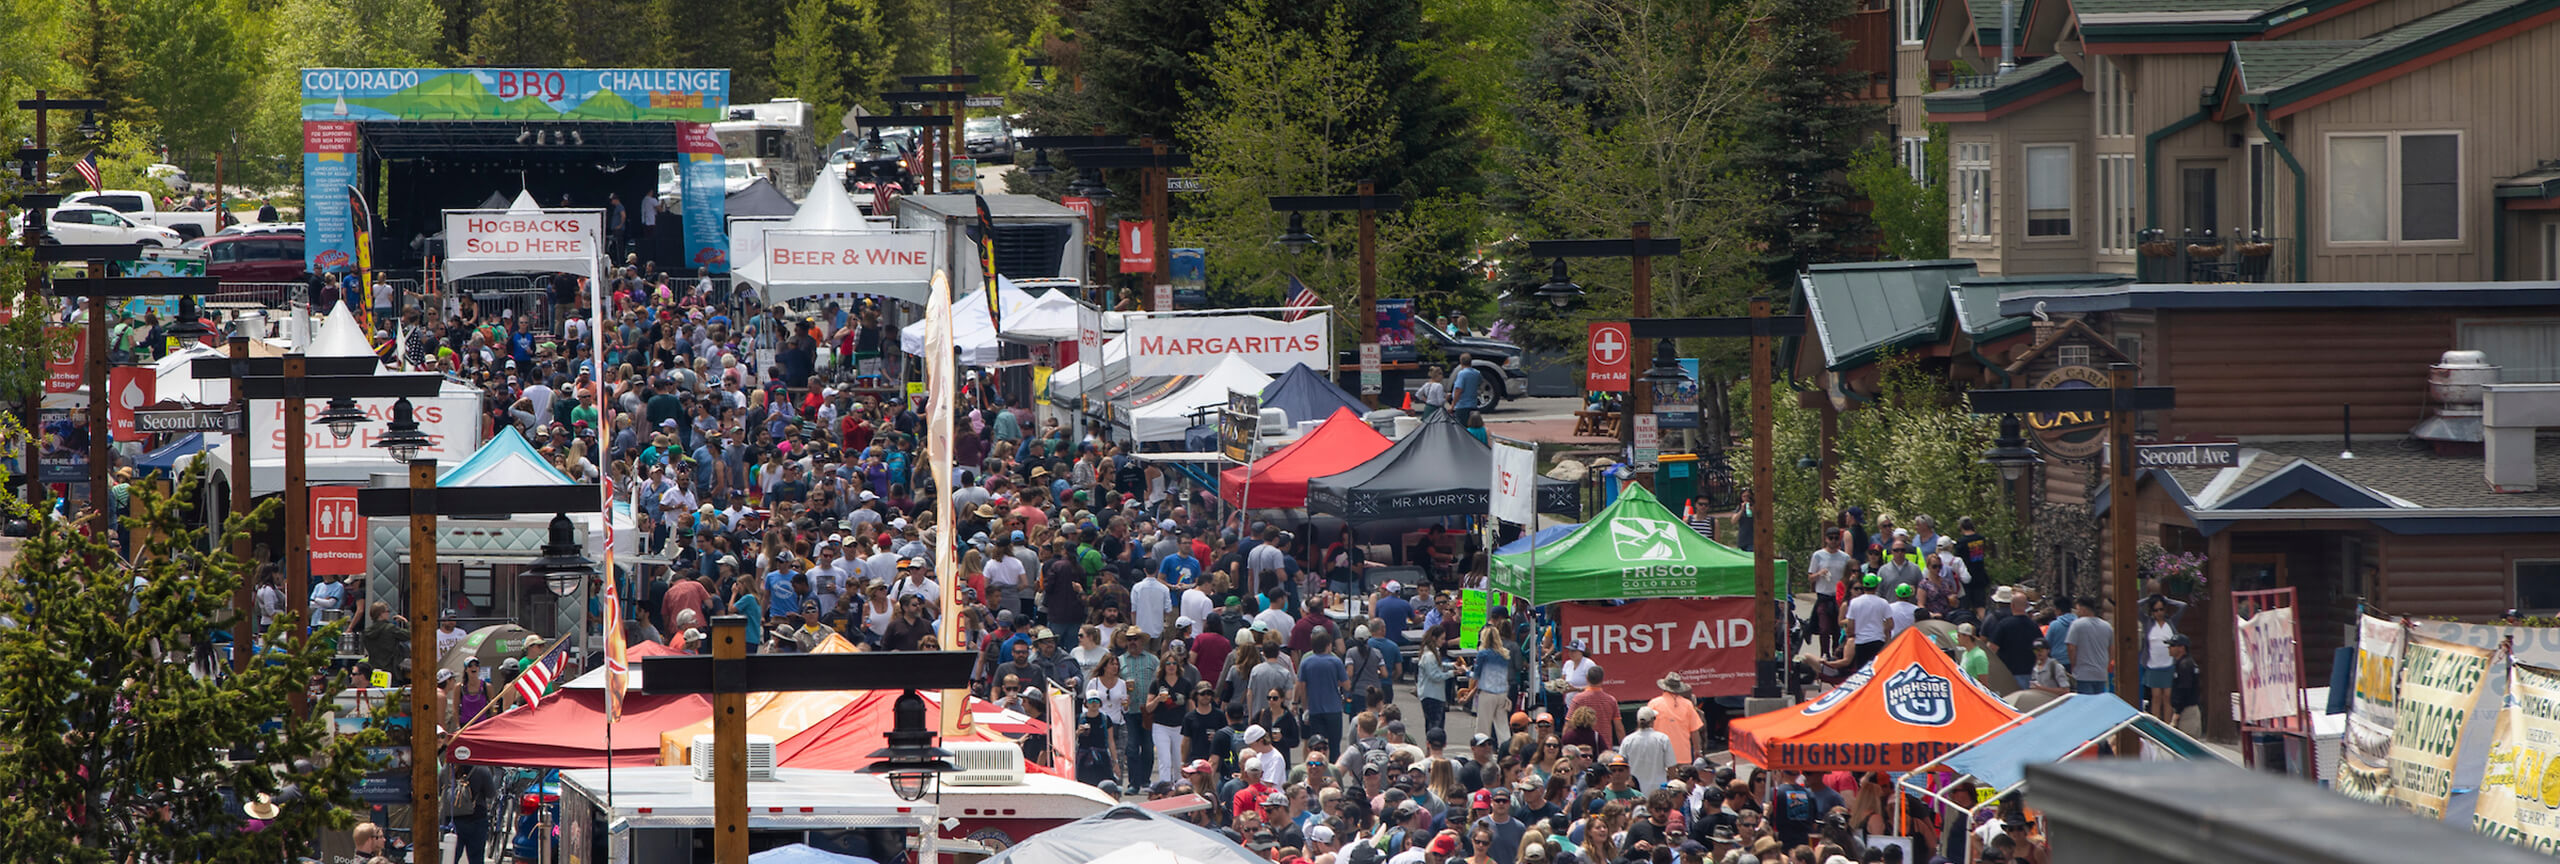 Street view of crowd of people at the Frisco BBQ Challenge